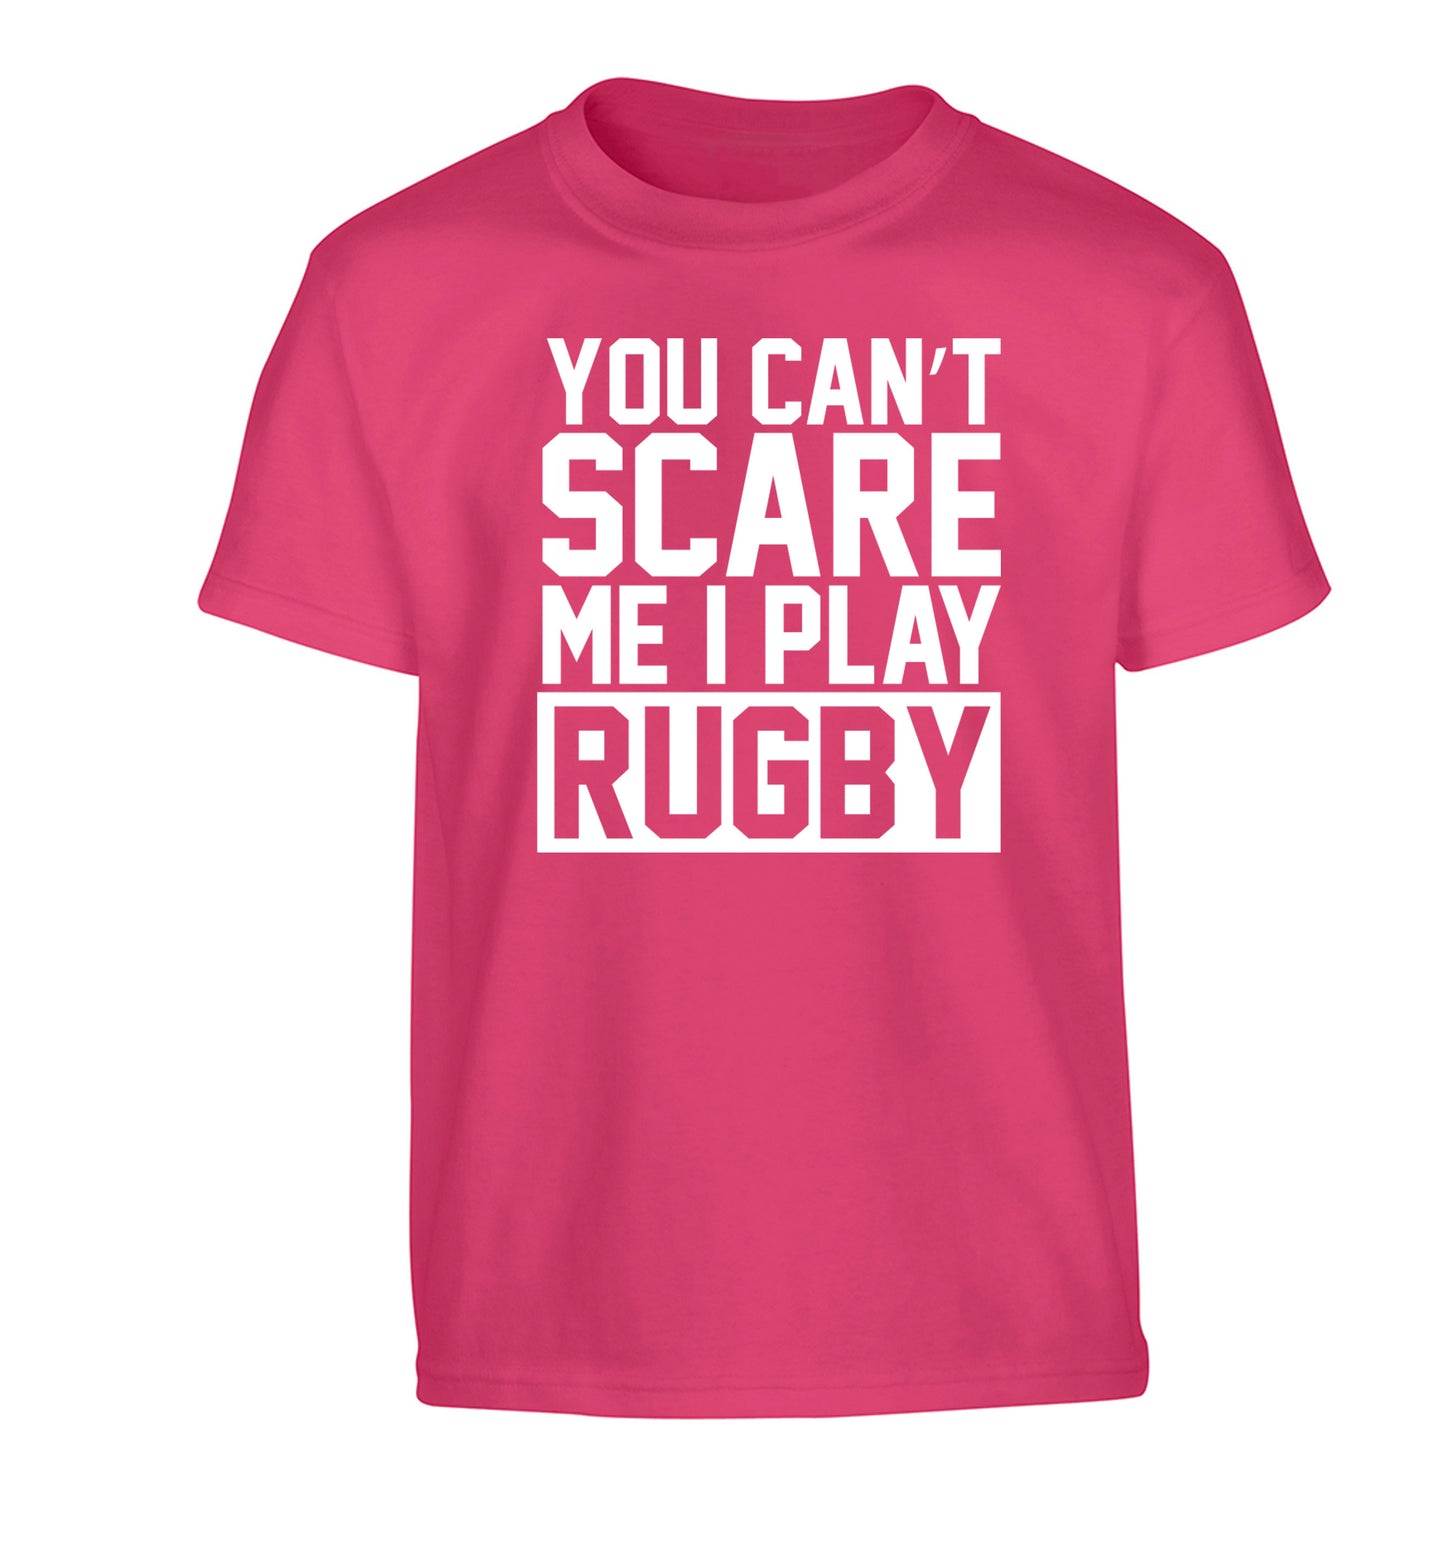 You can't scare me I play rugby Children's pink Tshirt 12-14 Years